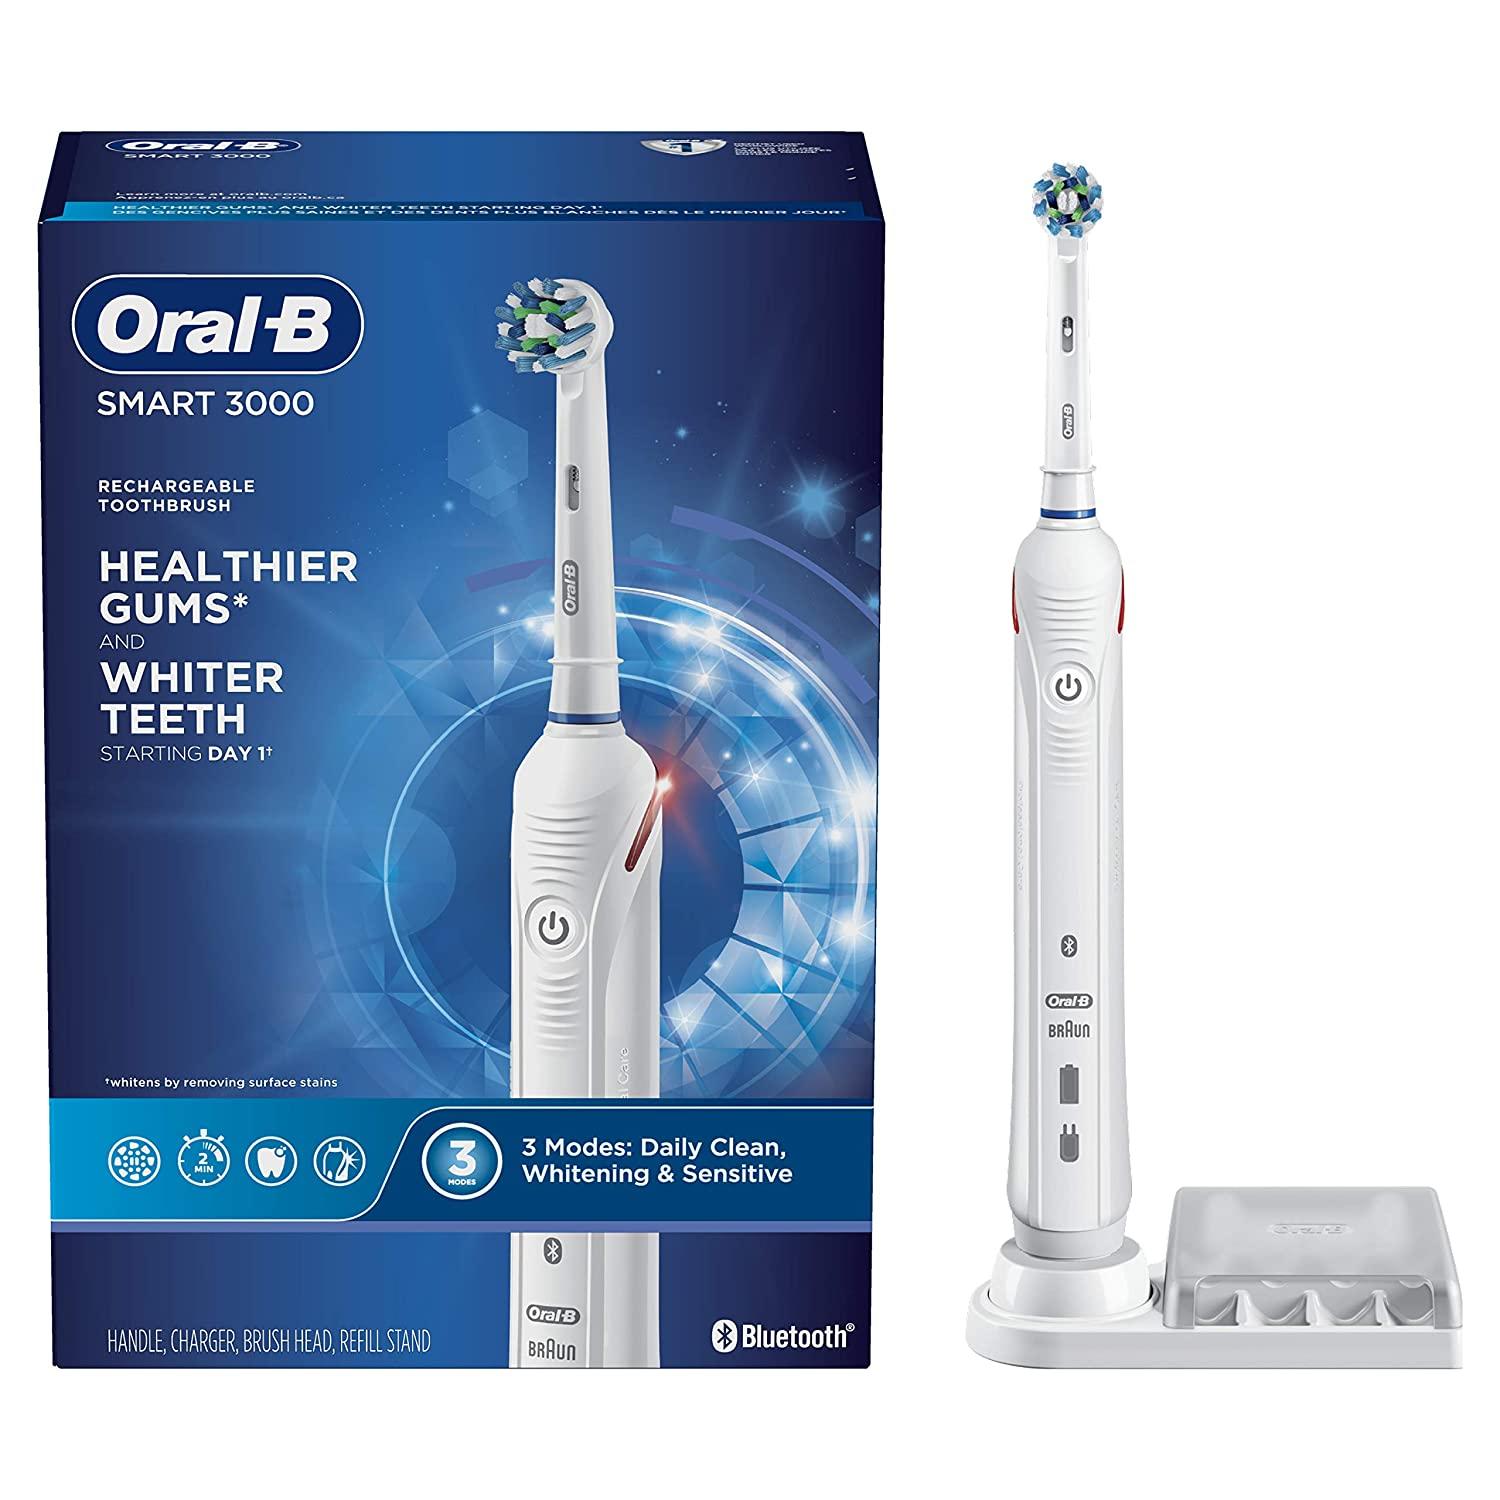 Oral-B 3000 Gum Care Electric Toothbrush for $44.99 Shipped